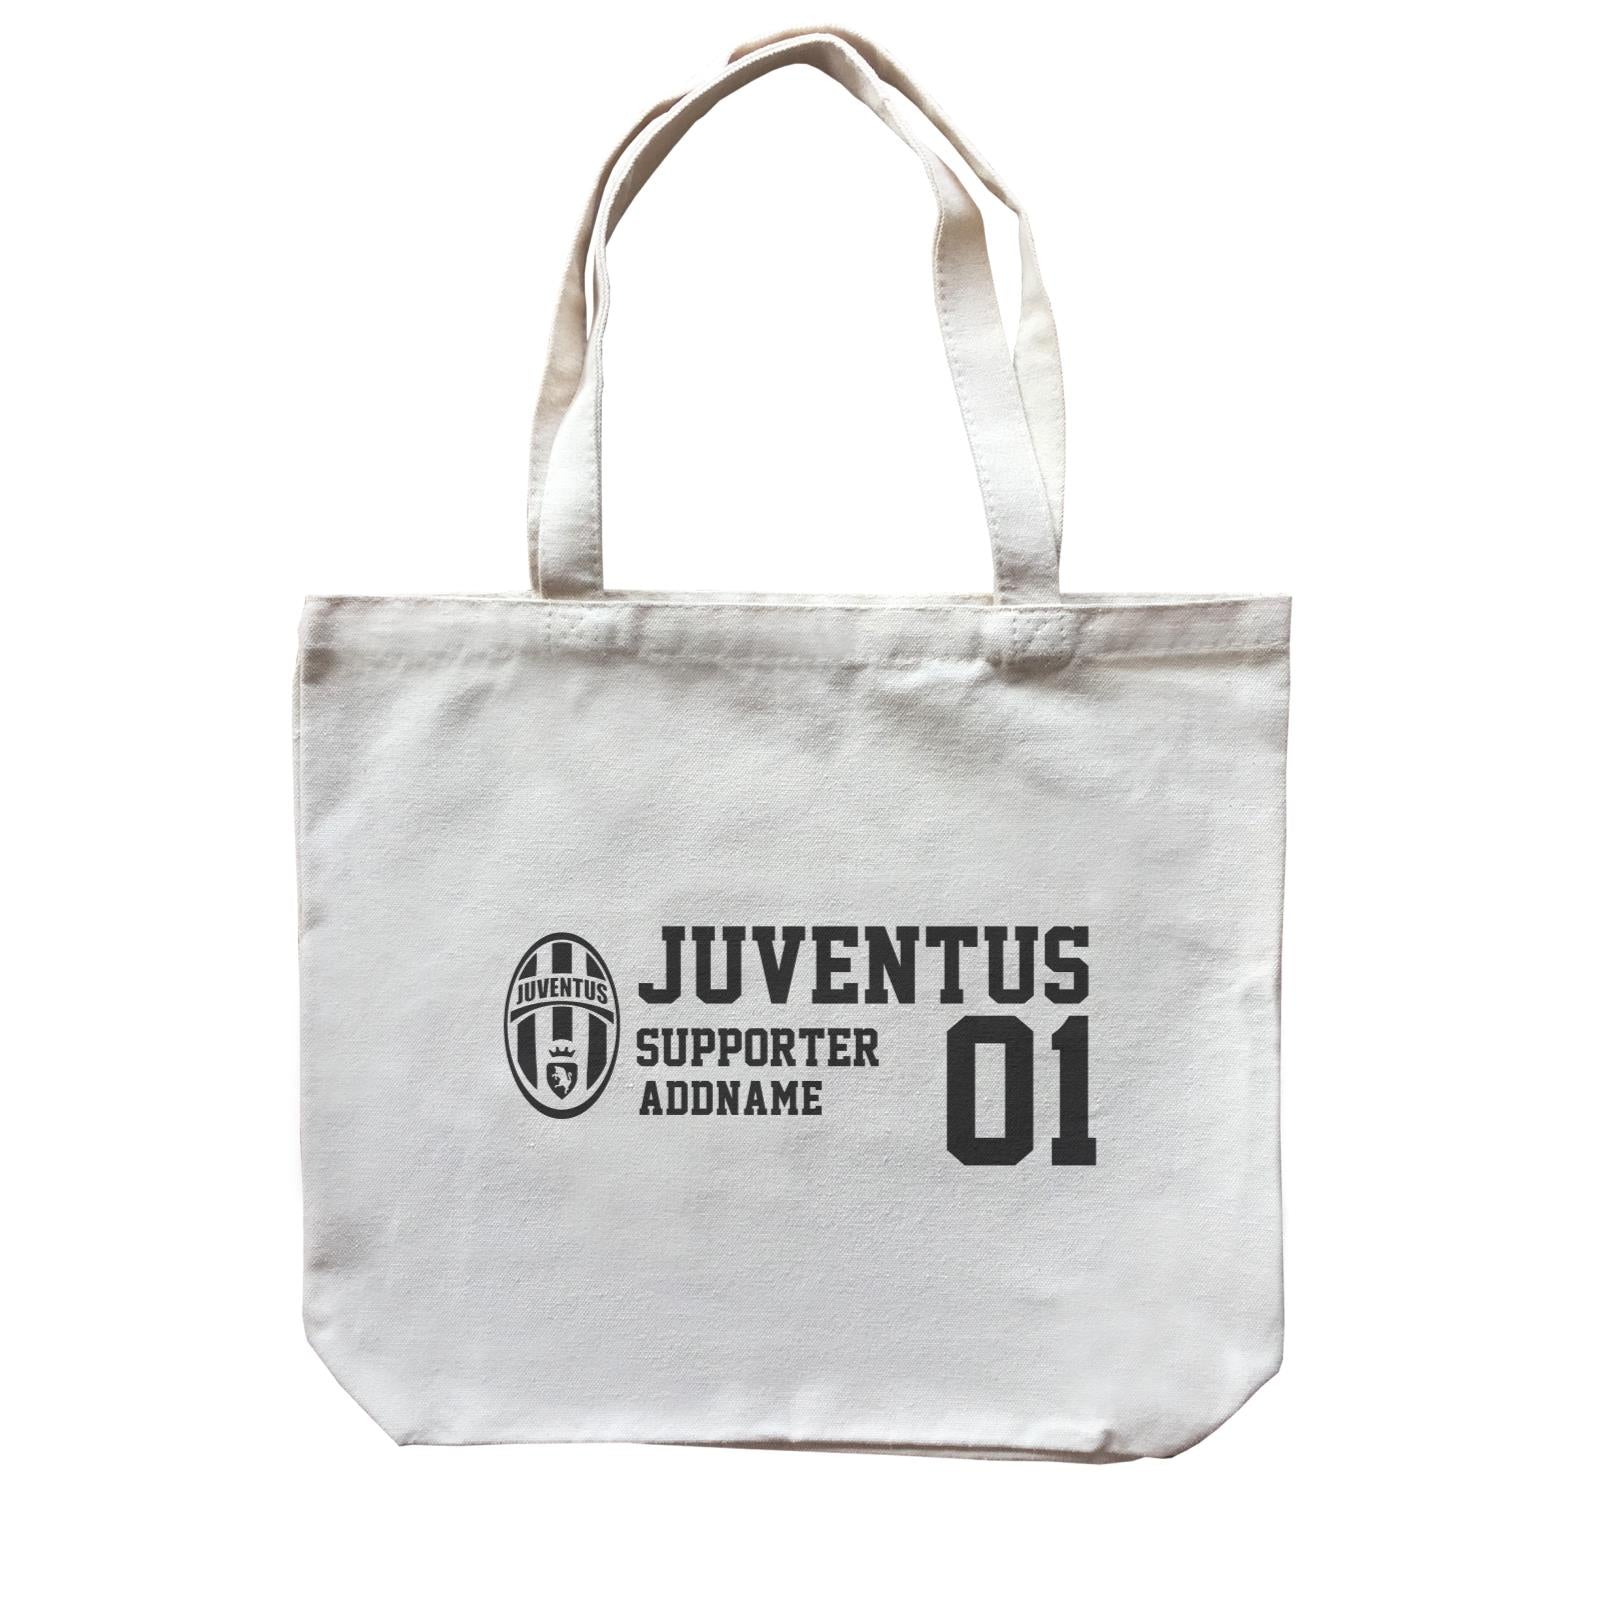 Juventus Football Supporter Accessories Addname Canvas Bag